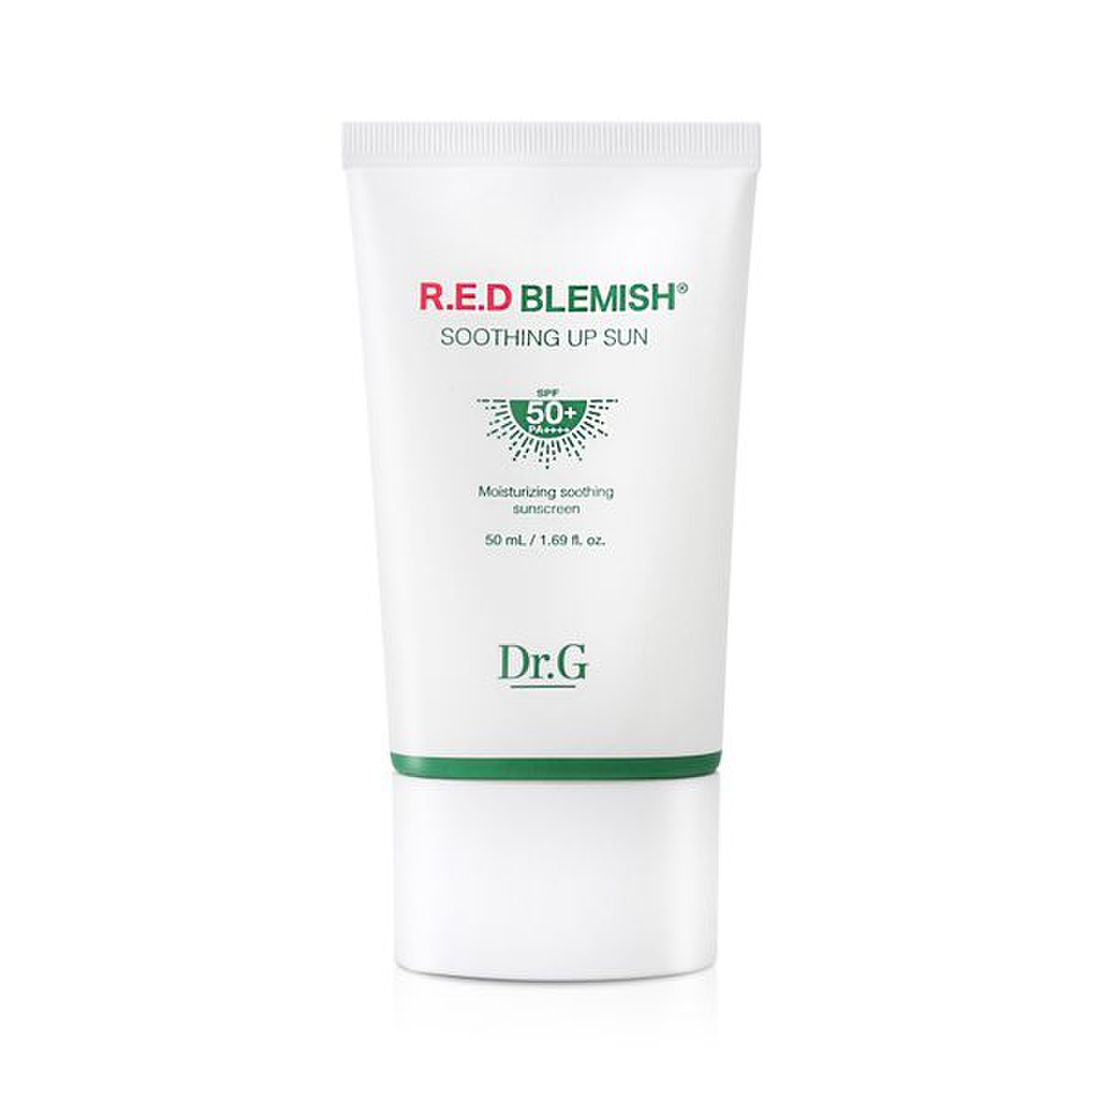 Dr.G Red Blemish Soothing Up Sun 50ml